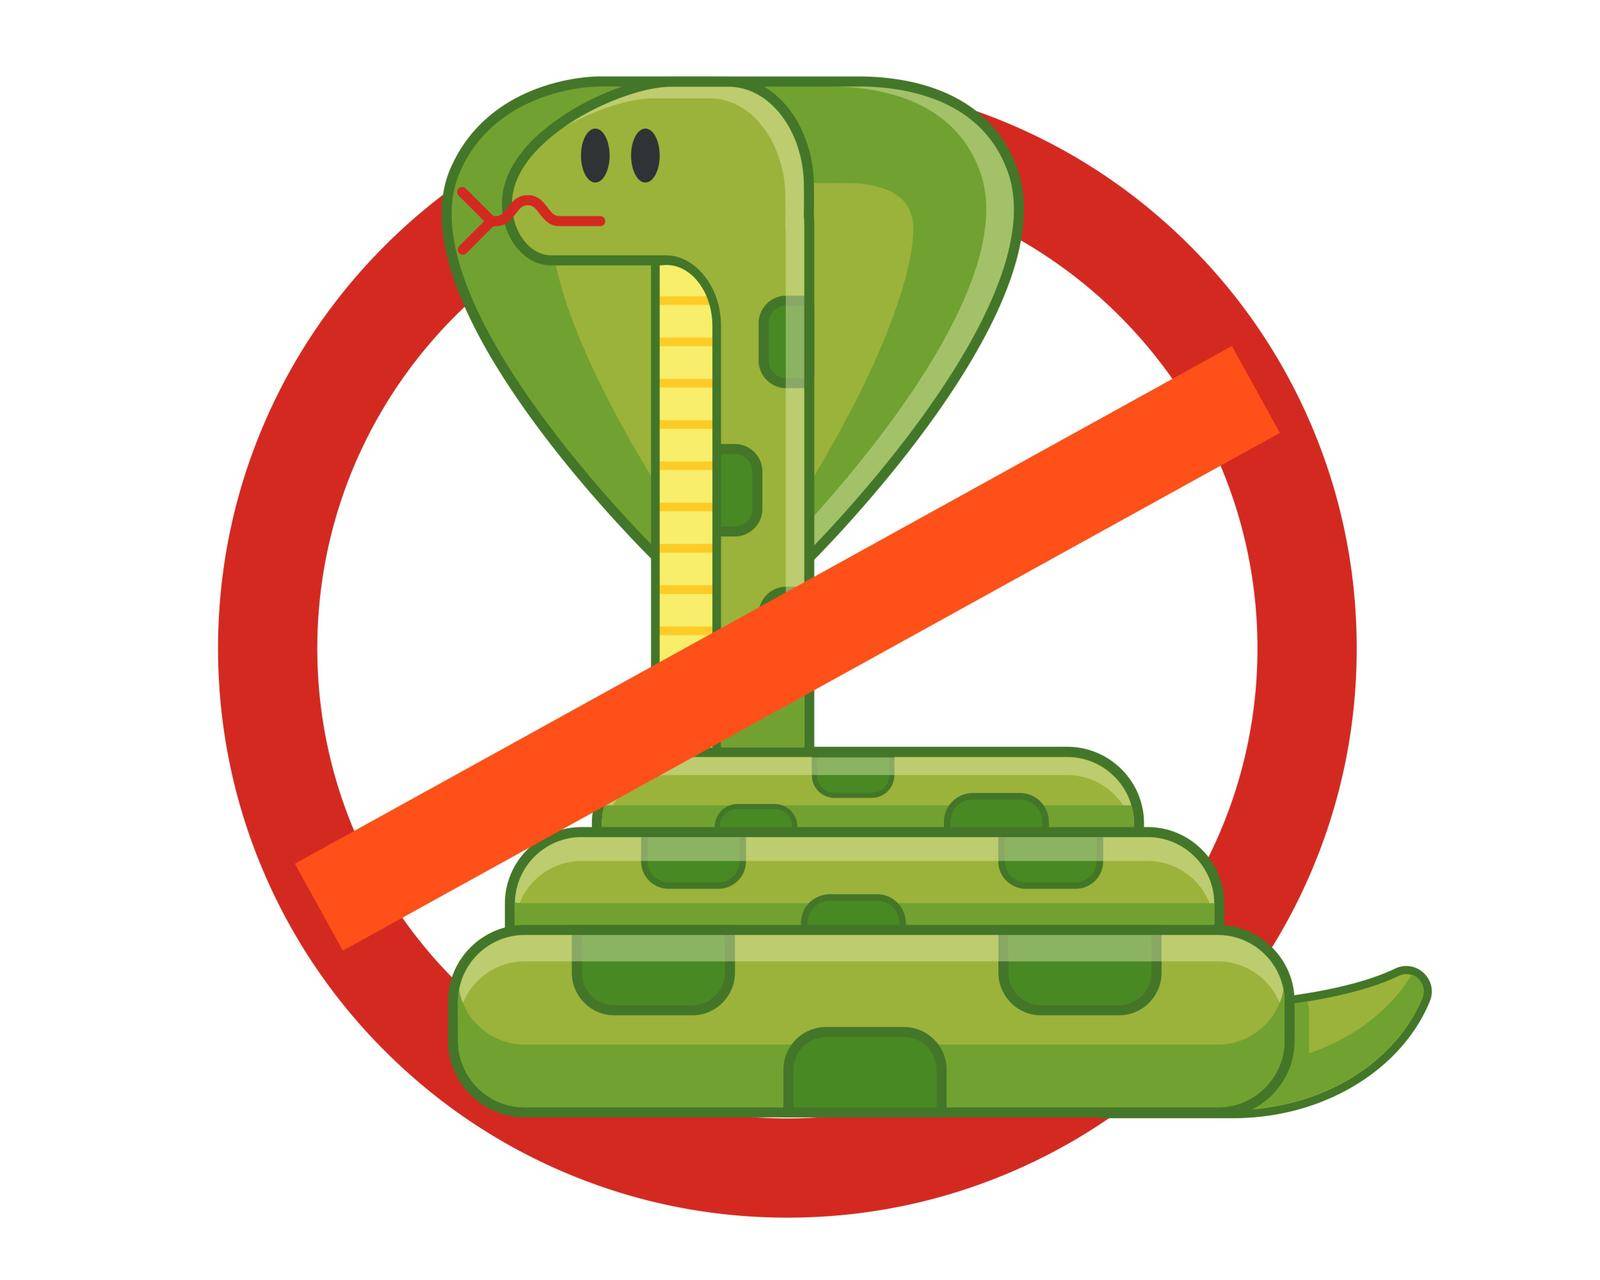 ban snakes. definition of toxic hazard. antidote to bites. flat isolated vector illustration.